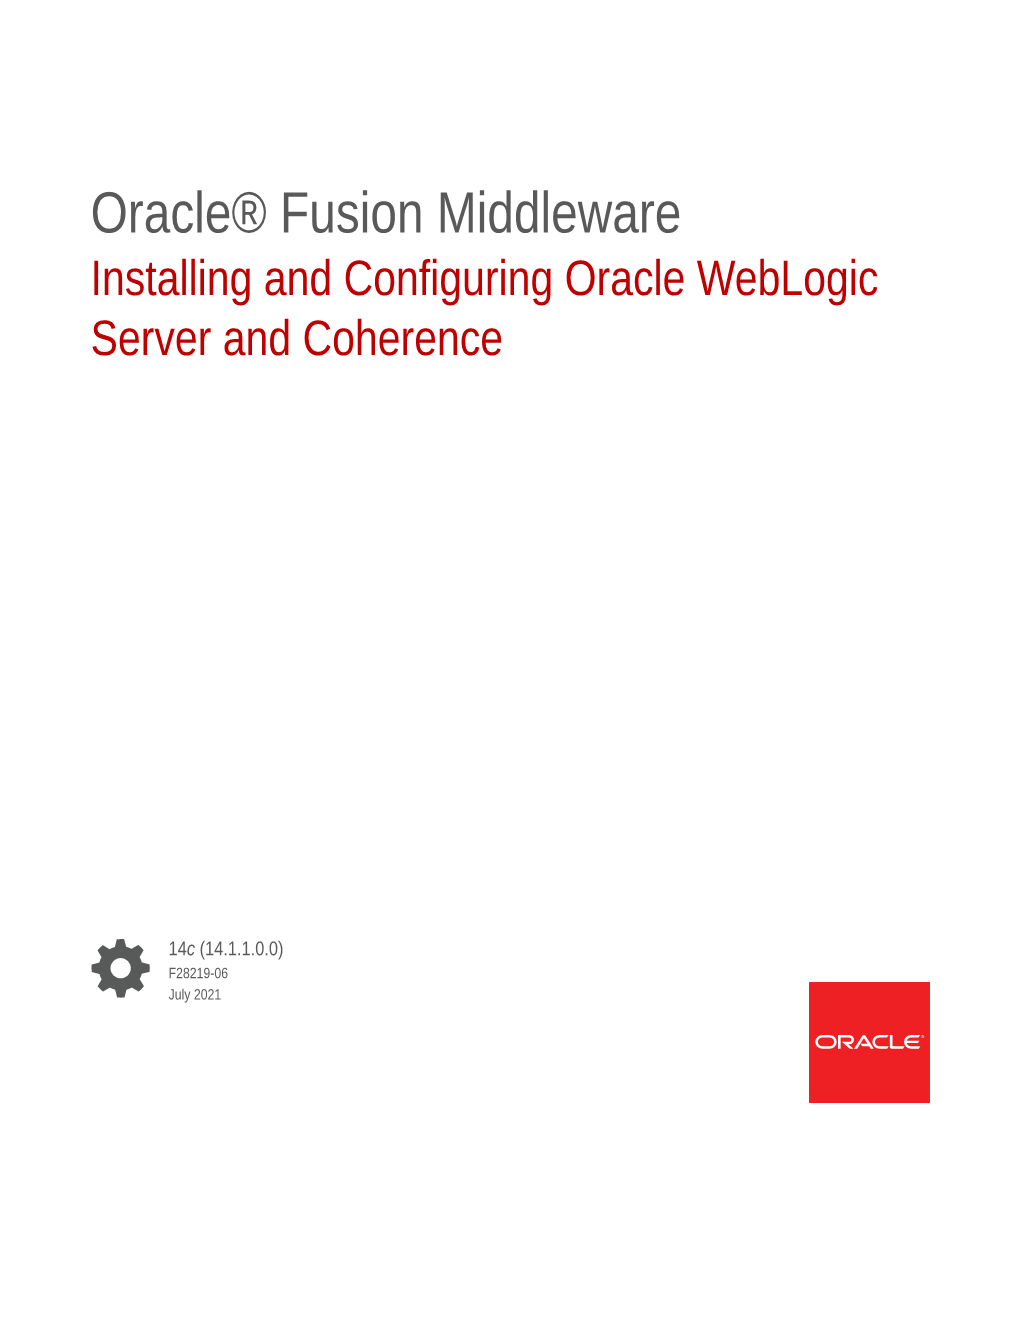 Installing and Configuring Oracle Weblogic Server and Coherence